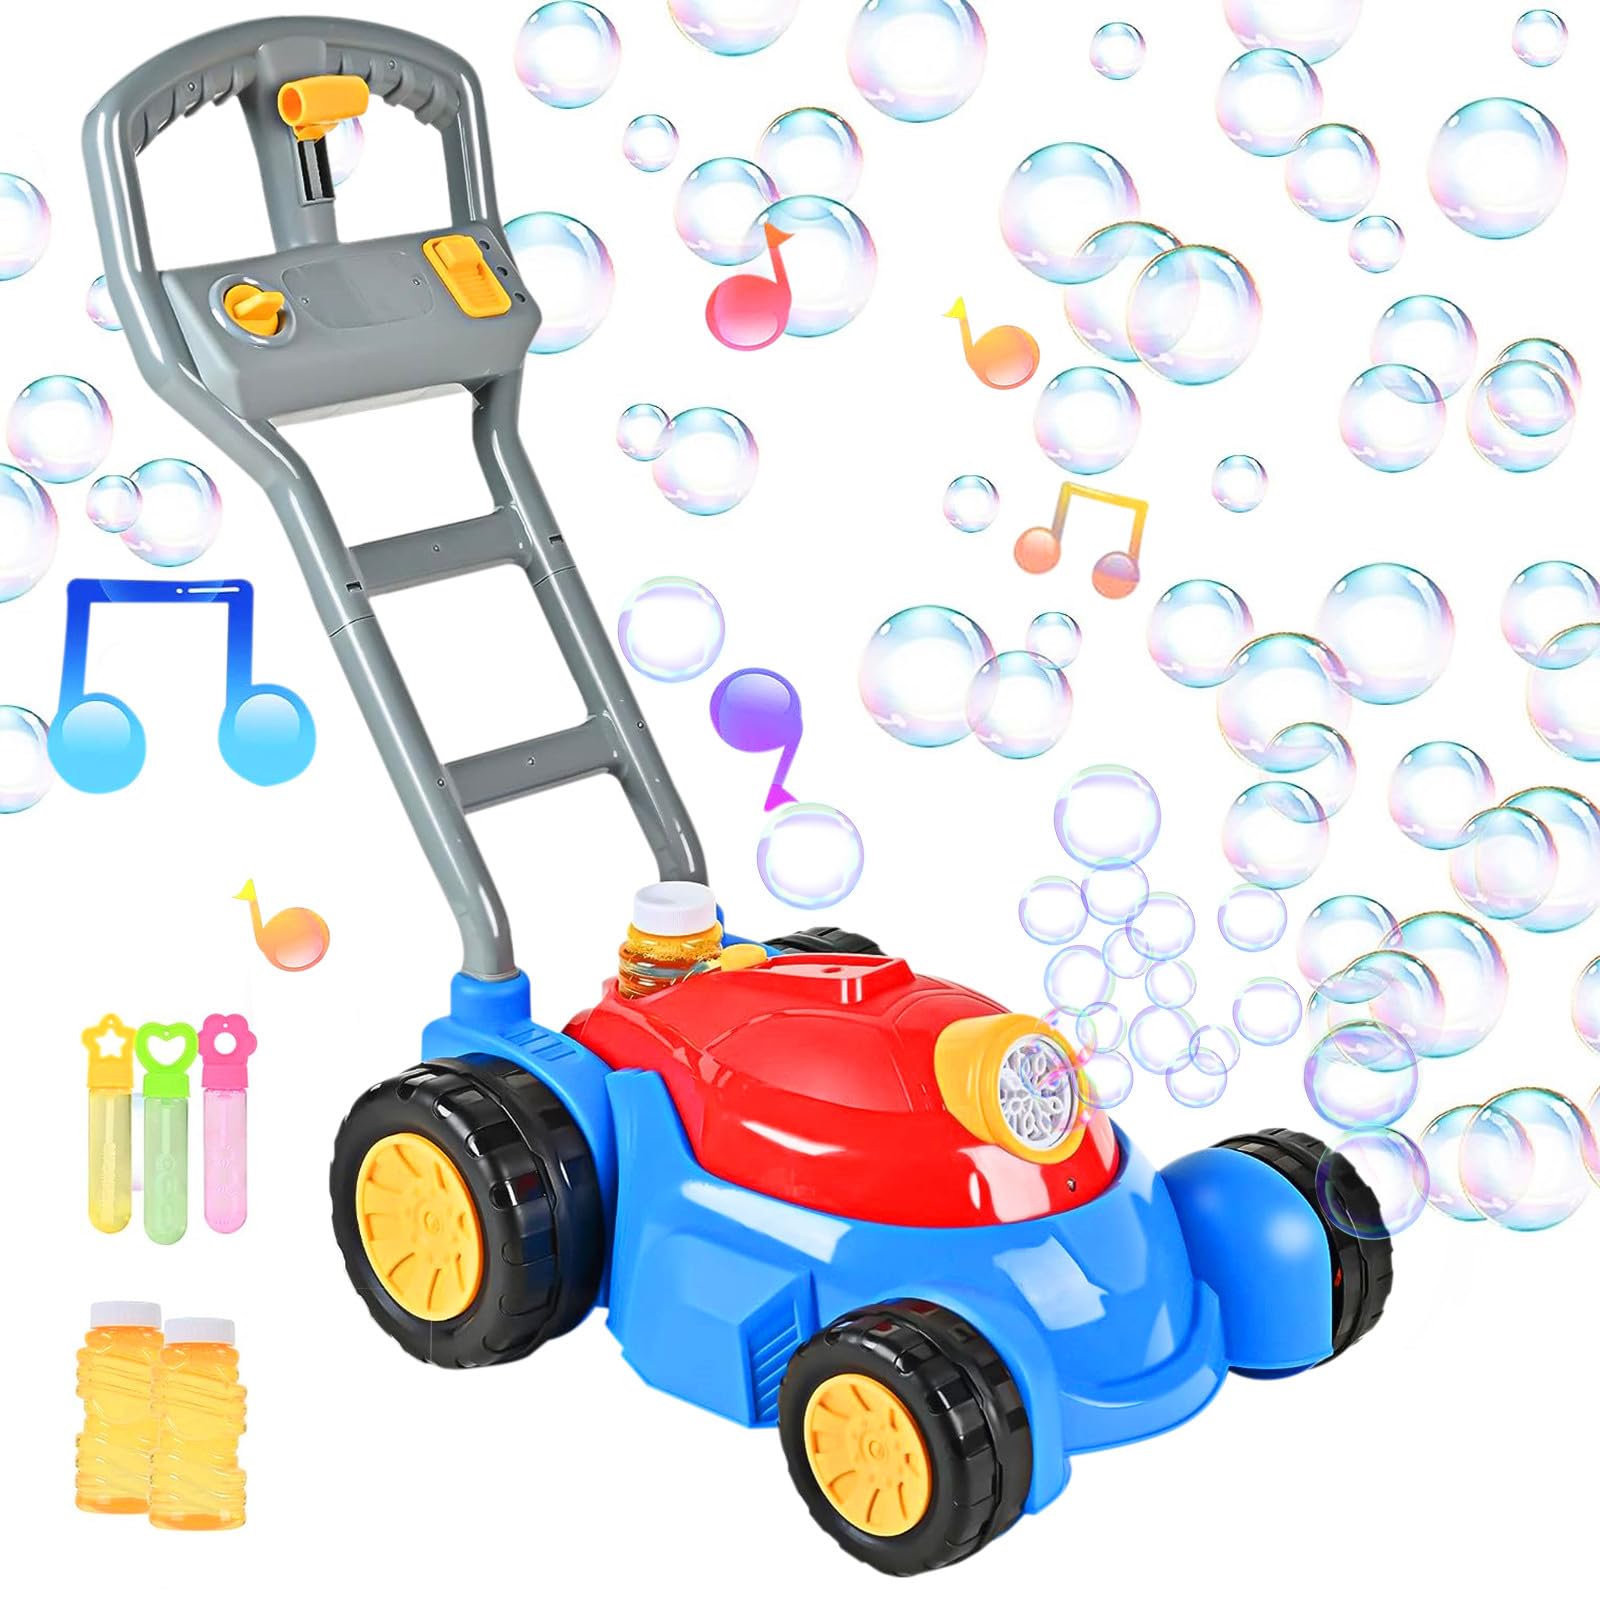 Upgraded Bubble Lawn Mower Toddler Toys, Kids Bubbles Toys for Boys Girls Age 1 2 3 4 5 6 Year Old, Toddler Birthday Outdoor Party Favors Easter Gifts